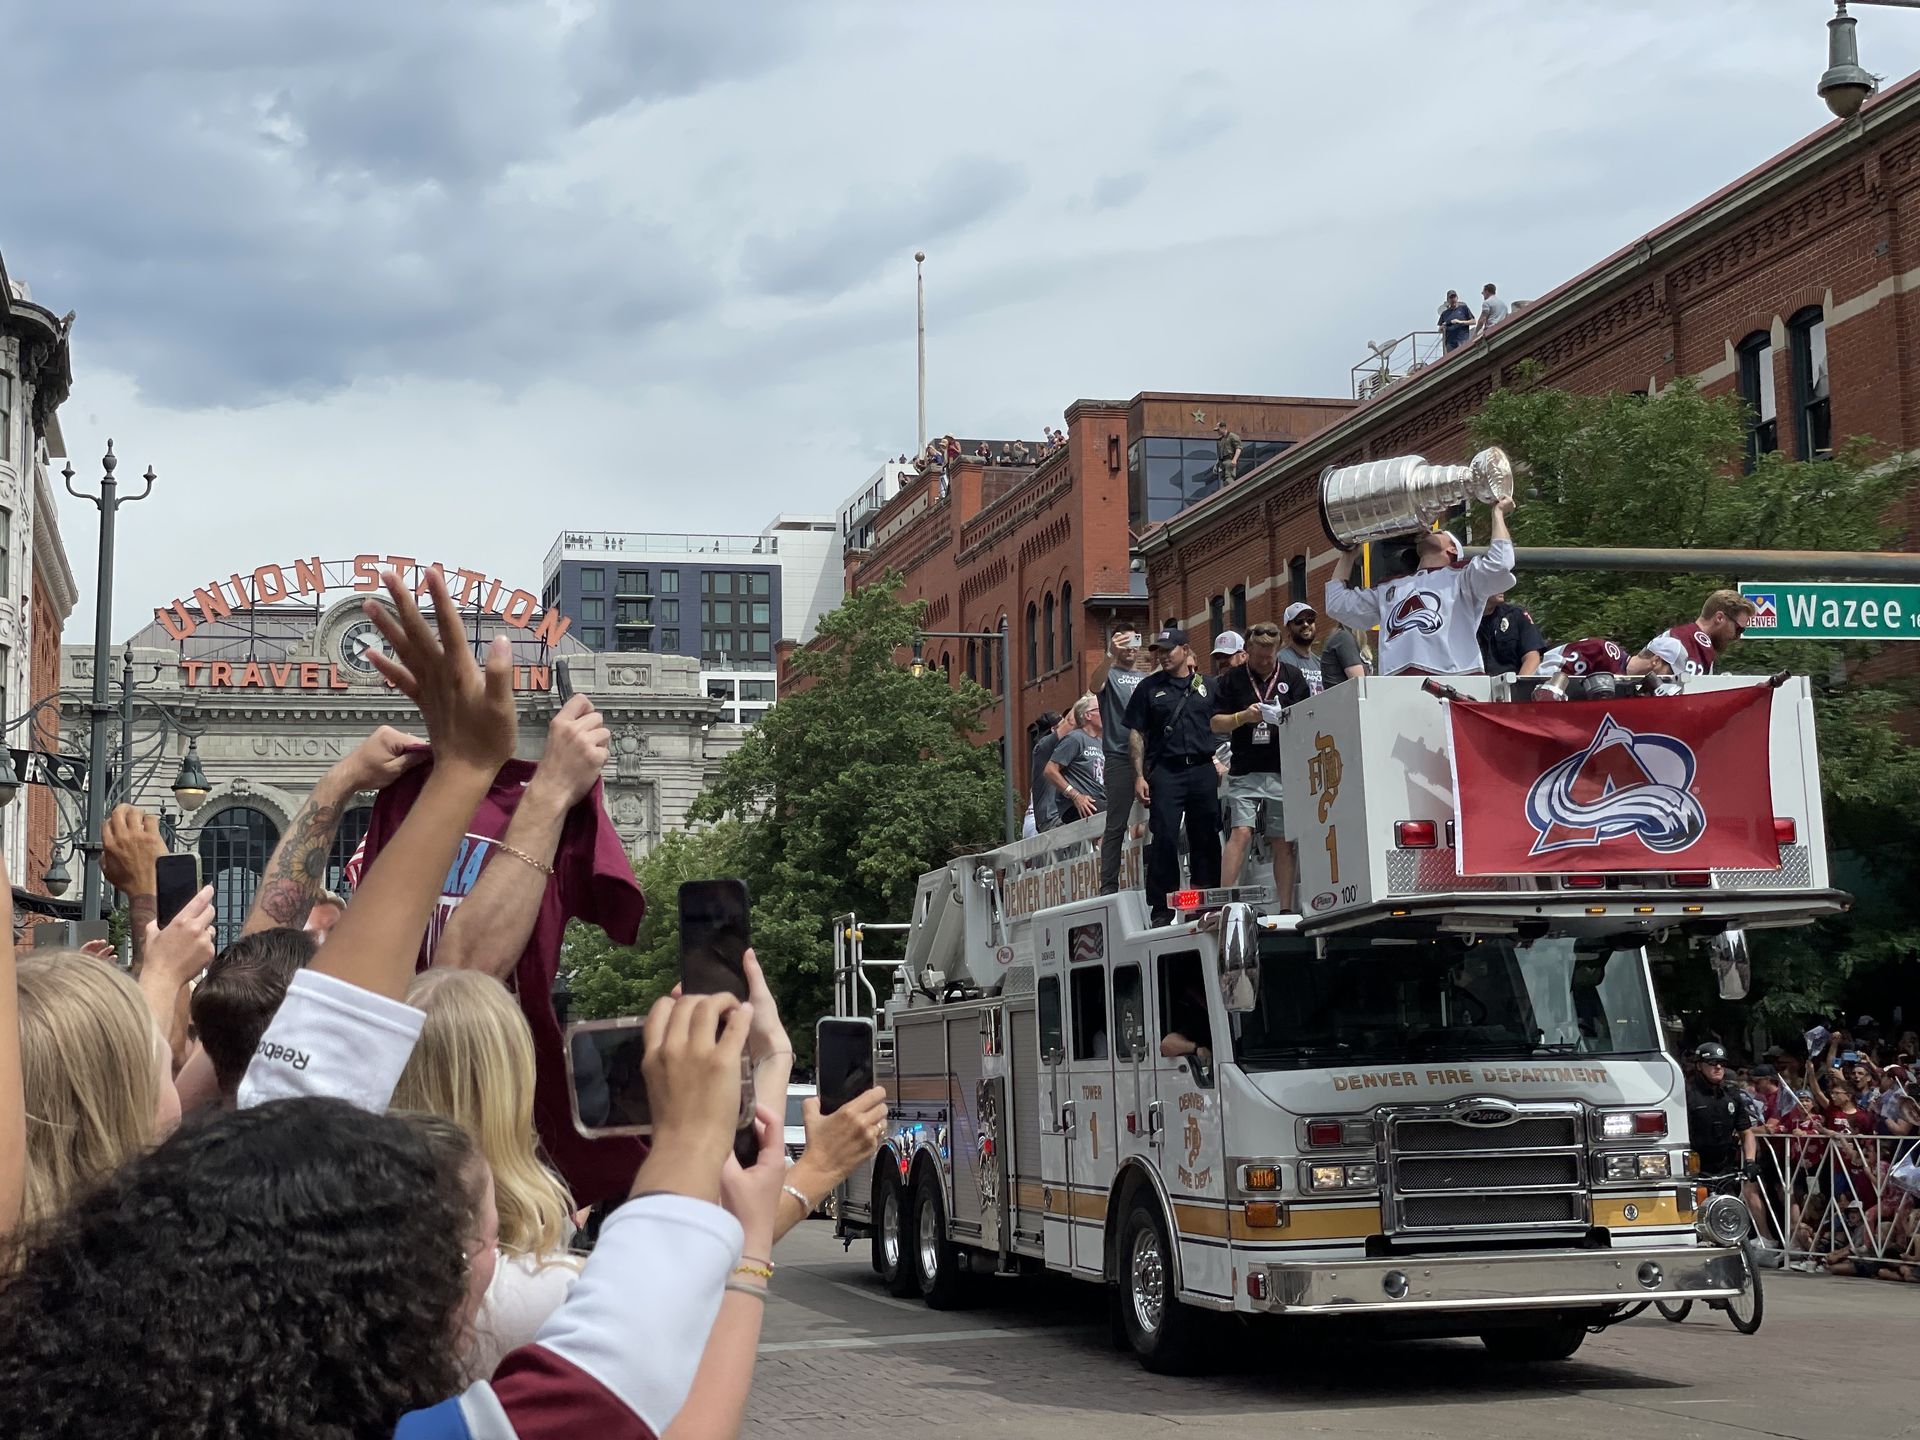 Colorado Avalanche Stanley Cup parade expected to draw more than 200,000  fans.